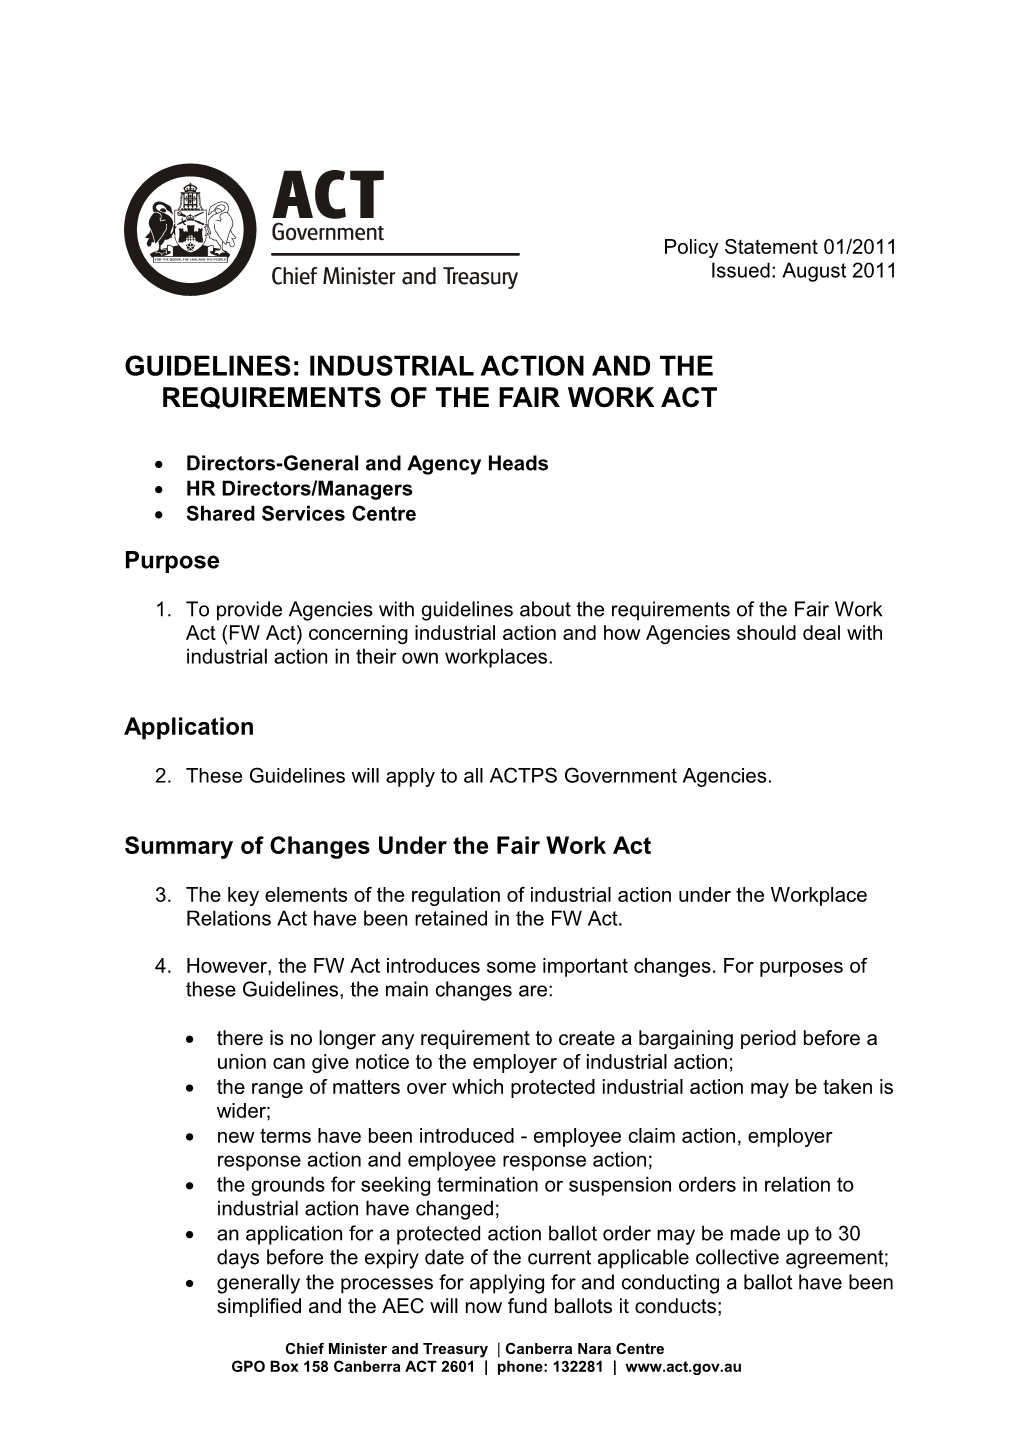 Industrial Action and the Requirements of the Fair Work Act POLICY STATEMENT & NOTICE to WORKERS